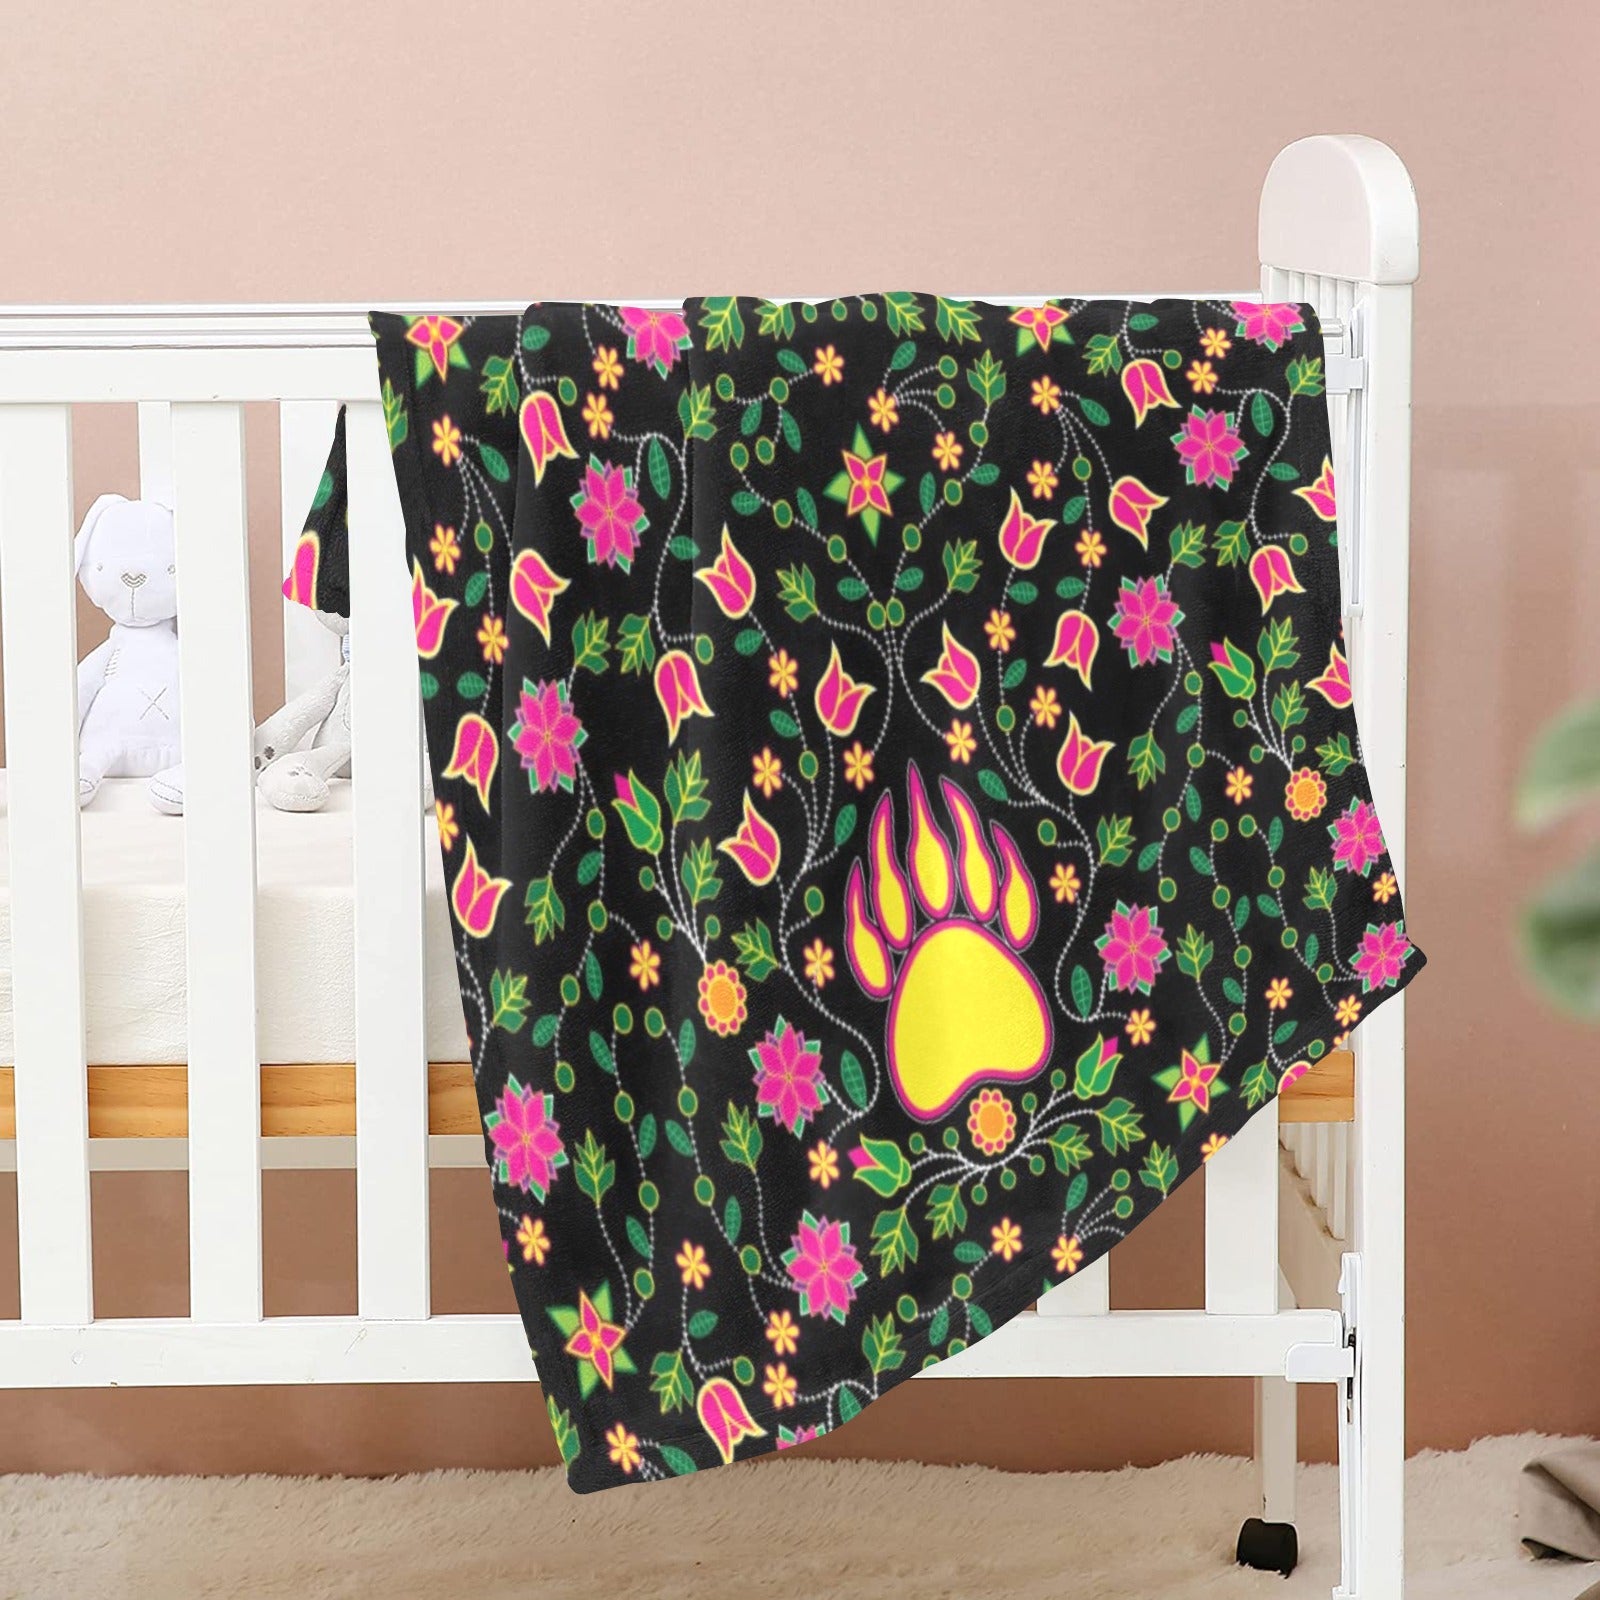 Floral Bearpaw Pink and Yellow Baby Blanket 40"x50" Baby Blanket 40"x50" e-joyer 